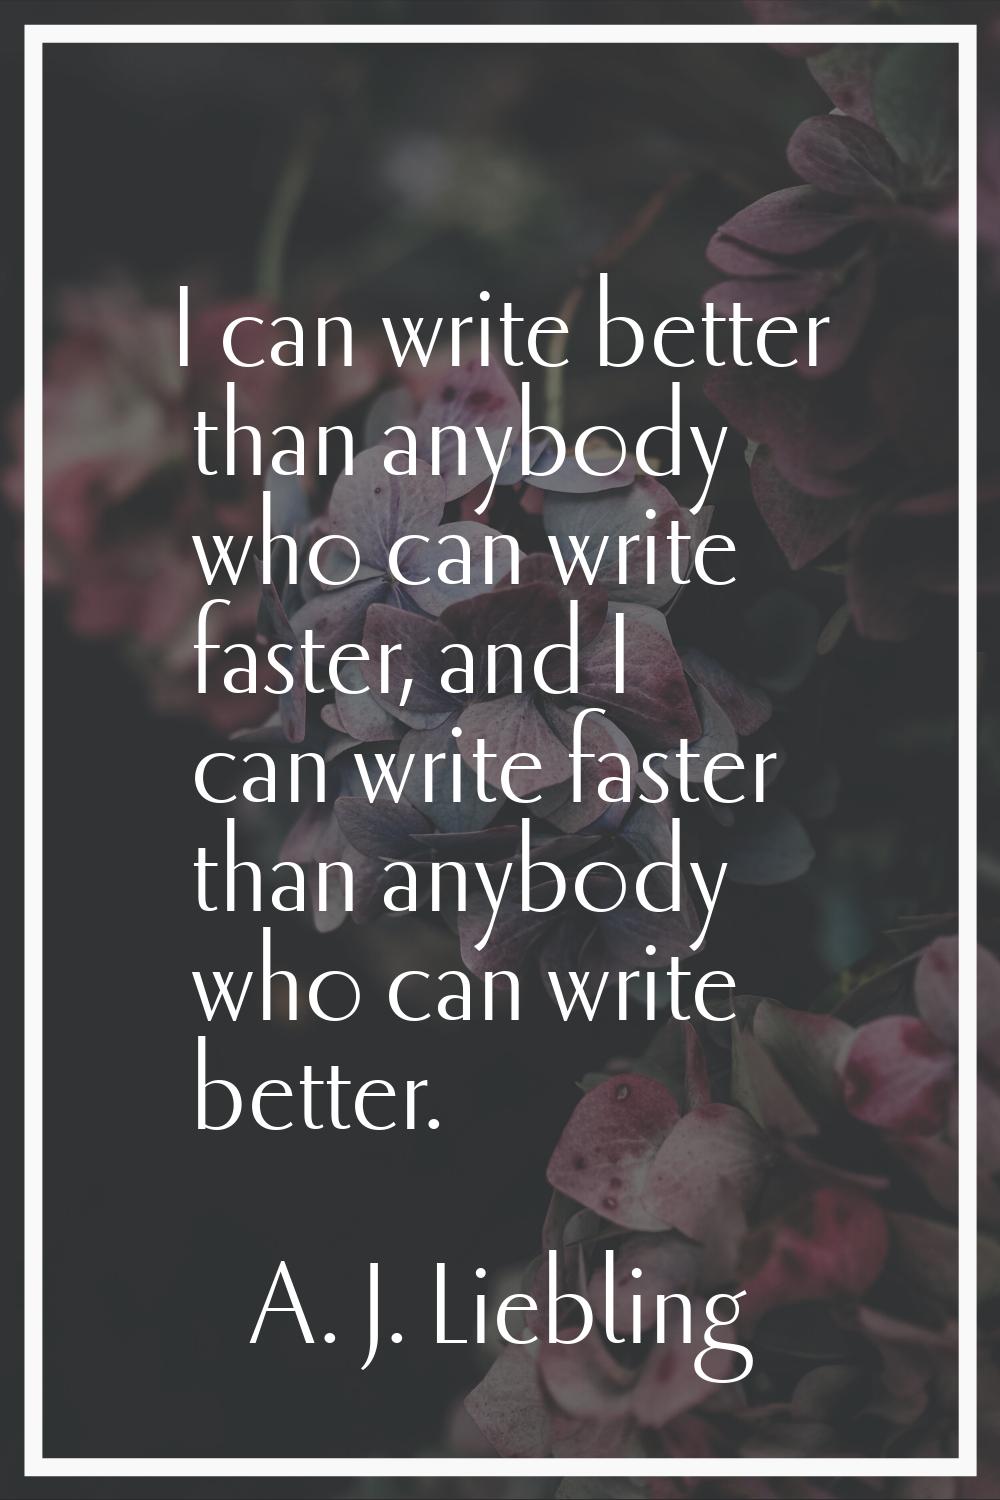 I can write better than anybody who can write faster, and I can write faster than anybody who can w